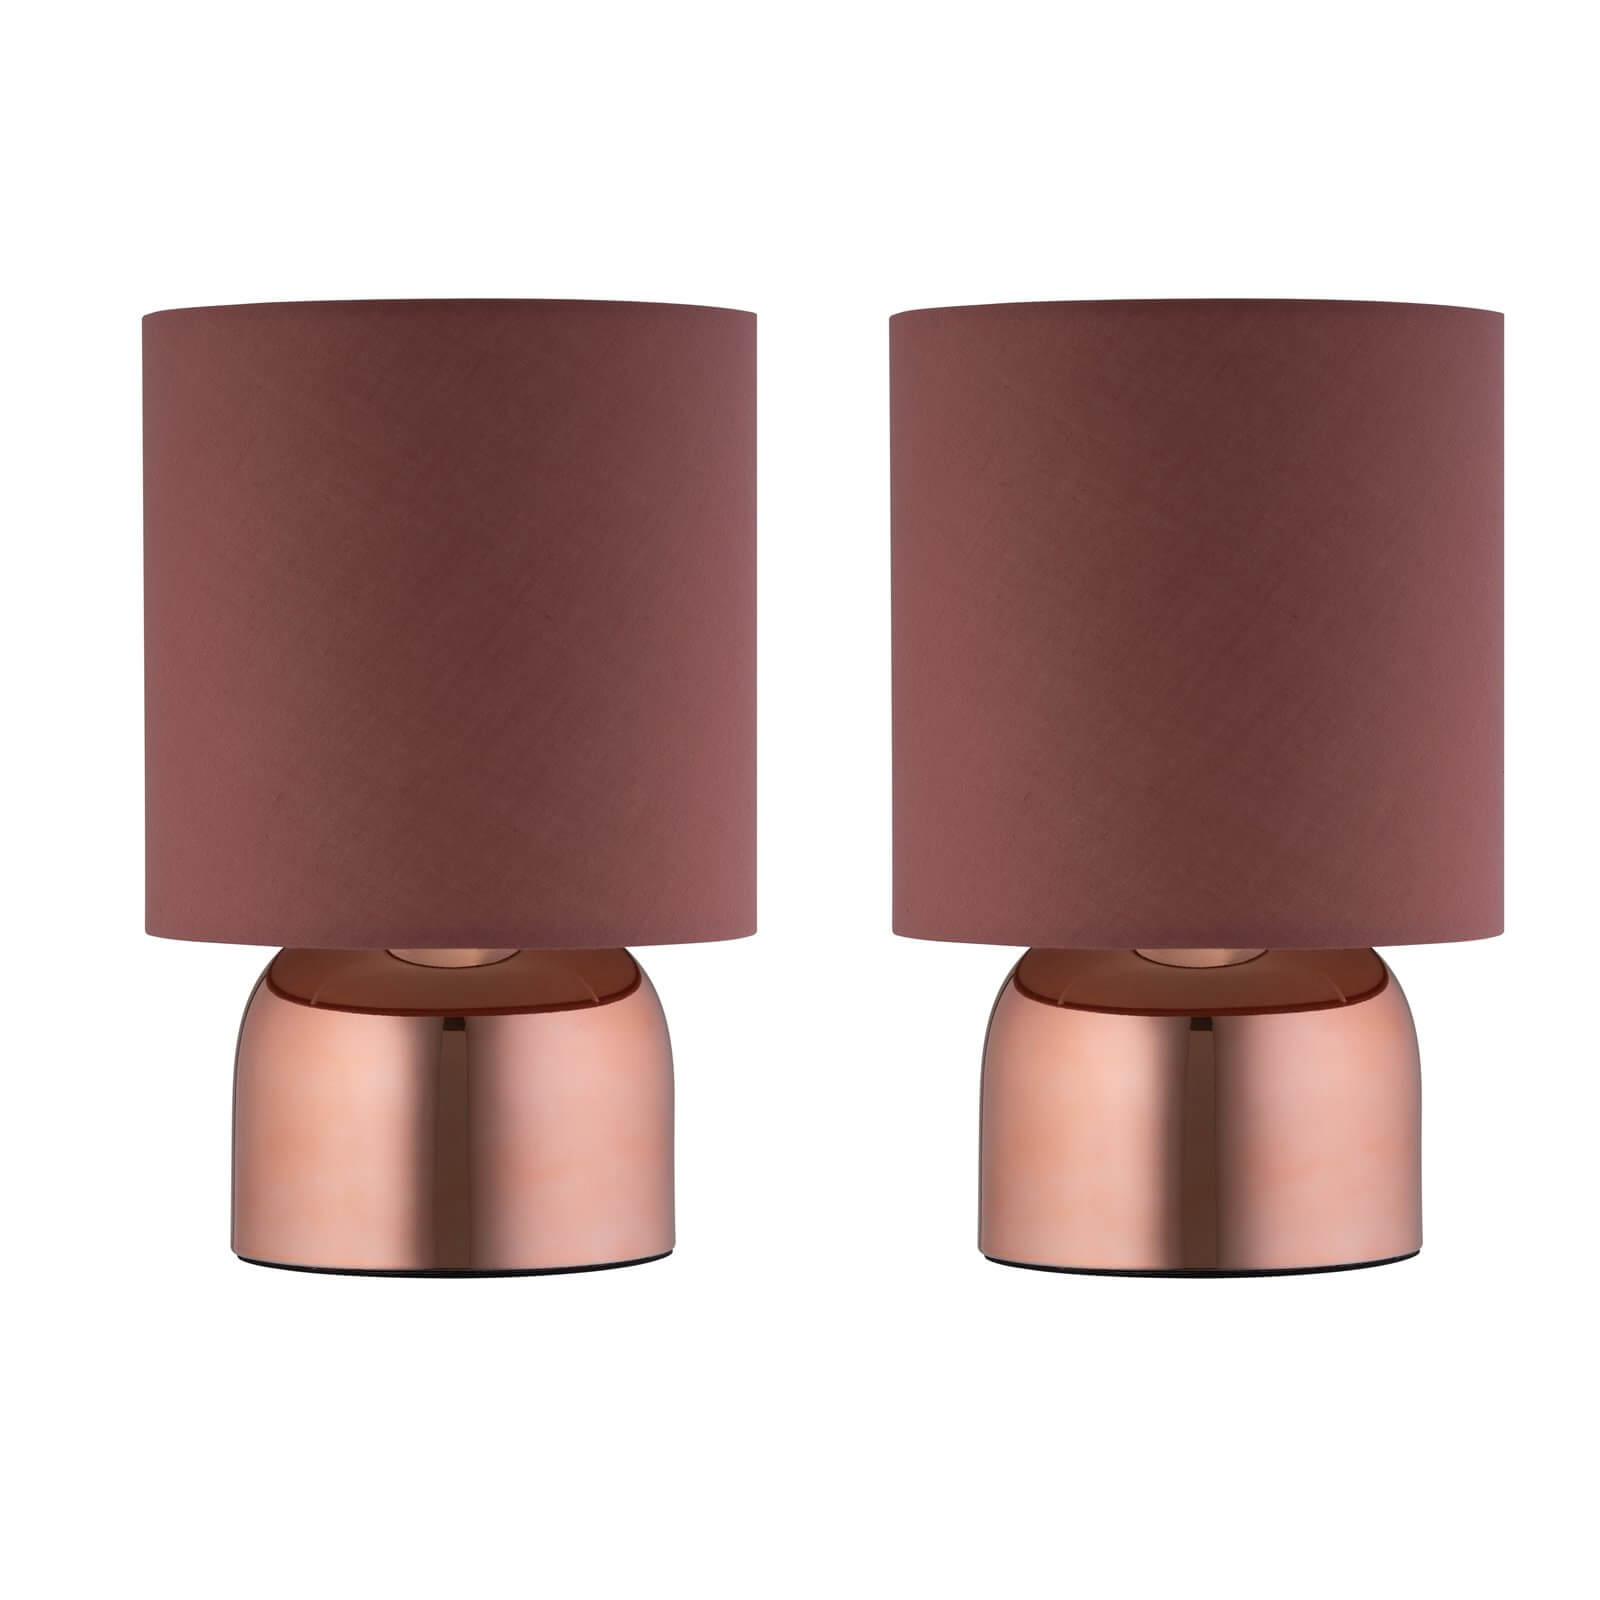 Marlow Copper Touch Lamps - Set of 2